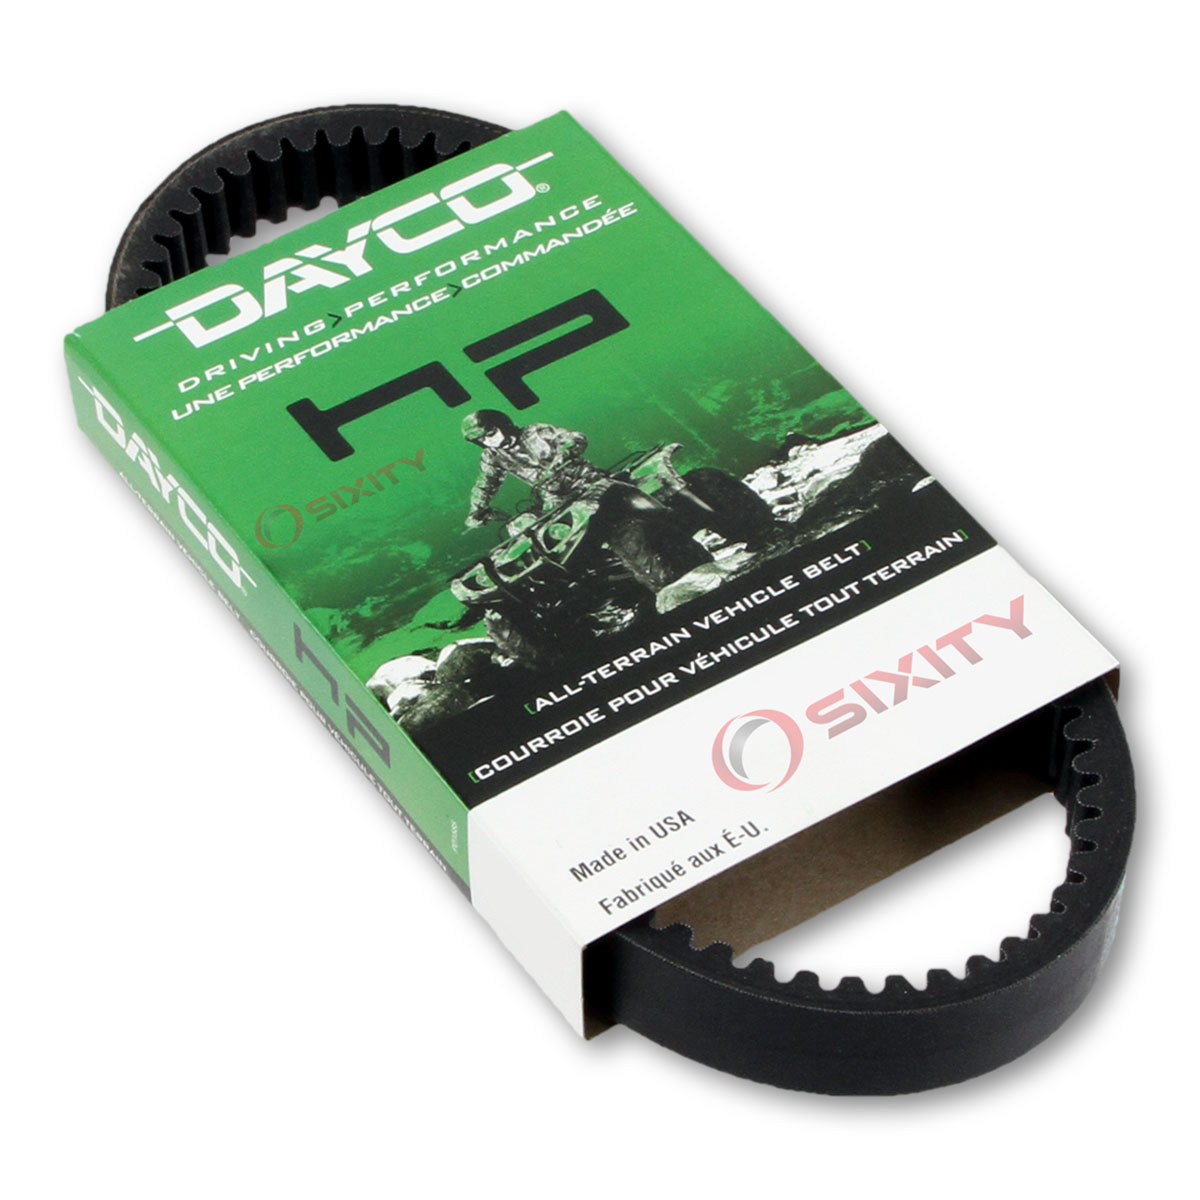 2017000012 Dayco HP Drive Belt for 2002 Arctic Cat 375 Auto 4 sku 2017000012